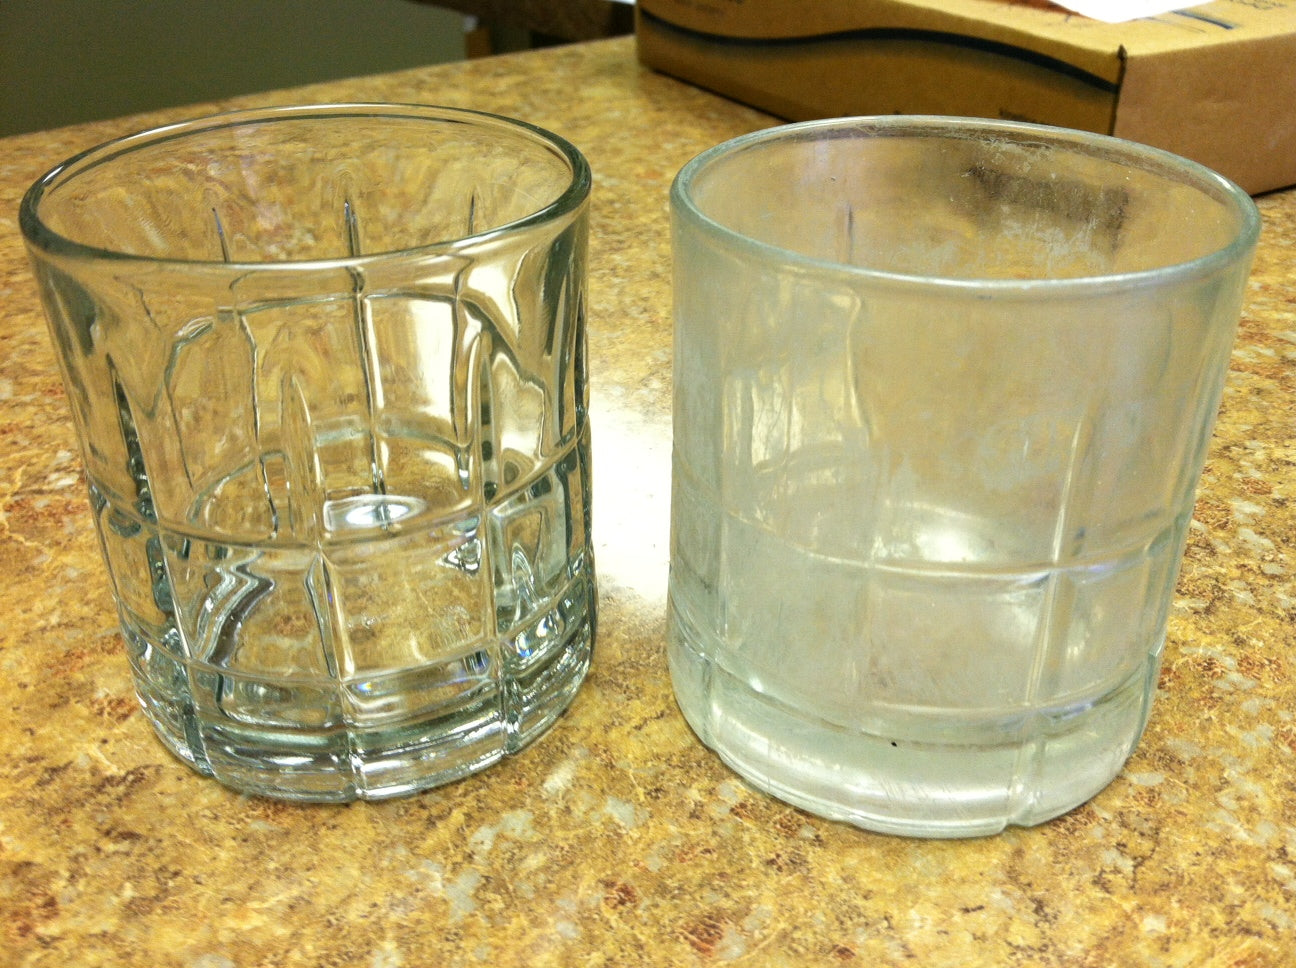 How to hand wash and make your glasses crystal clear again.